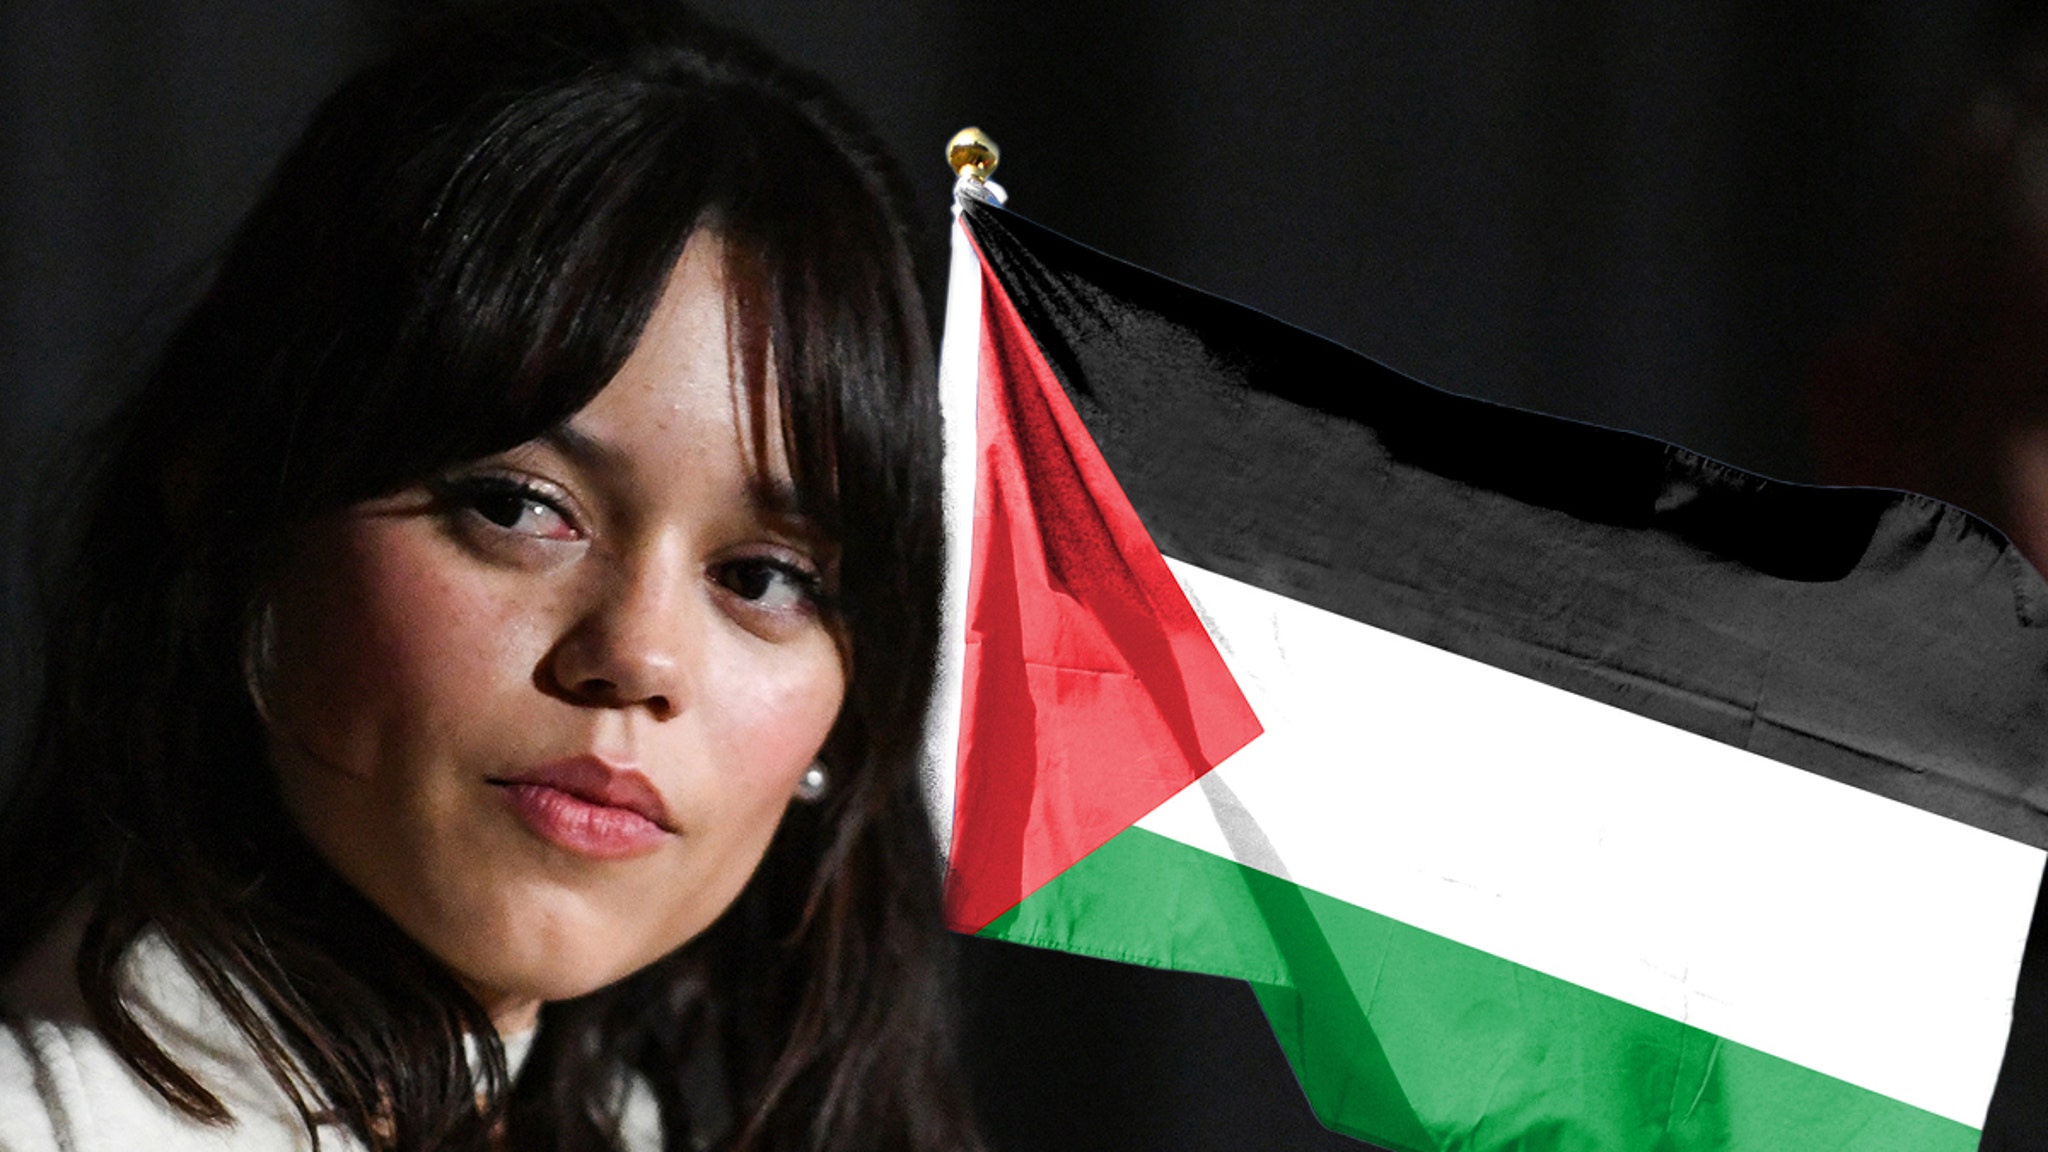 Jenna Ortega is supporting Palestine months after Melissa Barrera's 'Scream' fire